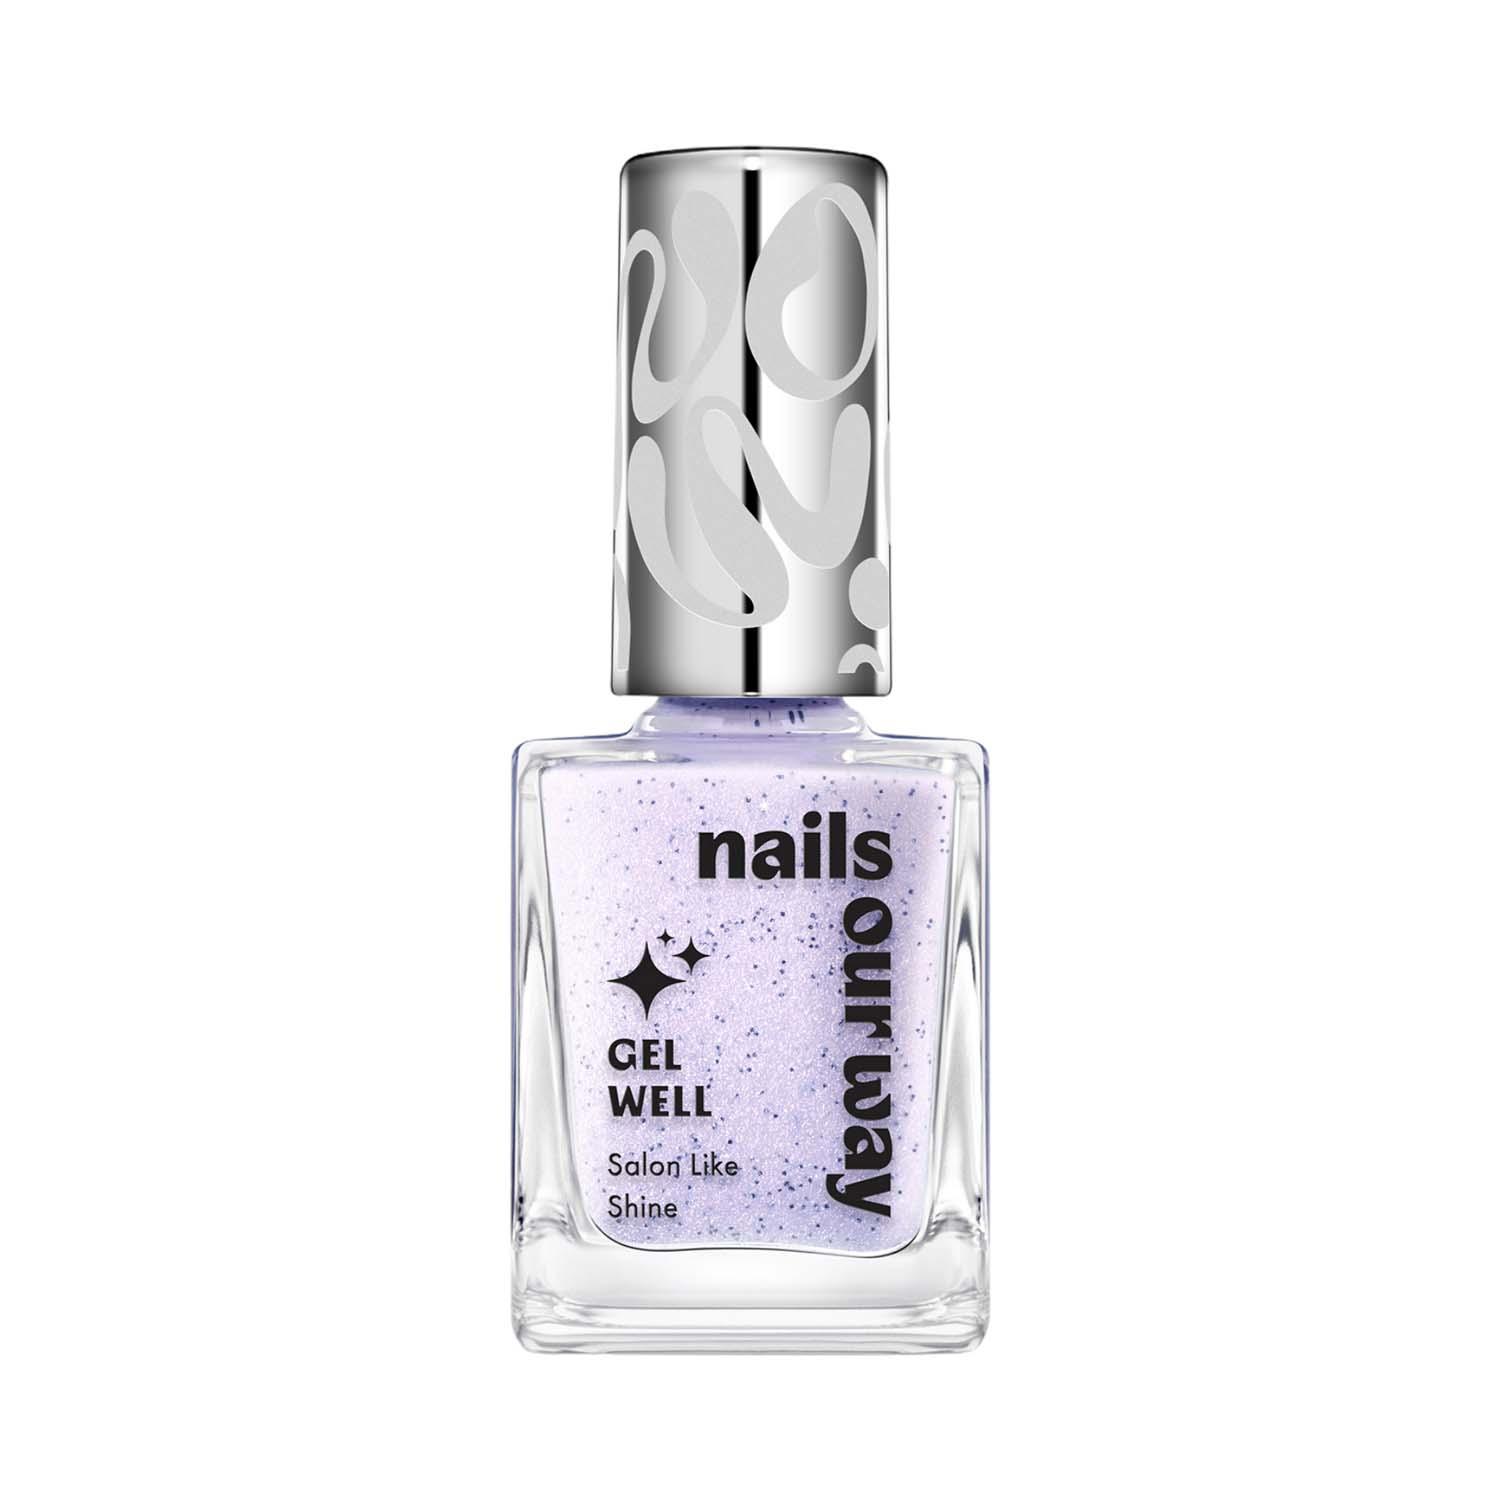 Nails Our Way | Nails Our Way Gel Well Nail Enamel - 219 Inquisitive (10 ml)